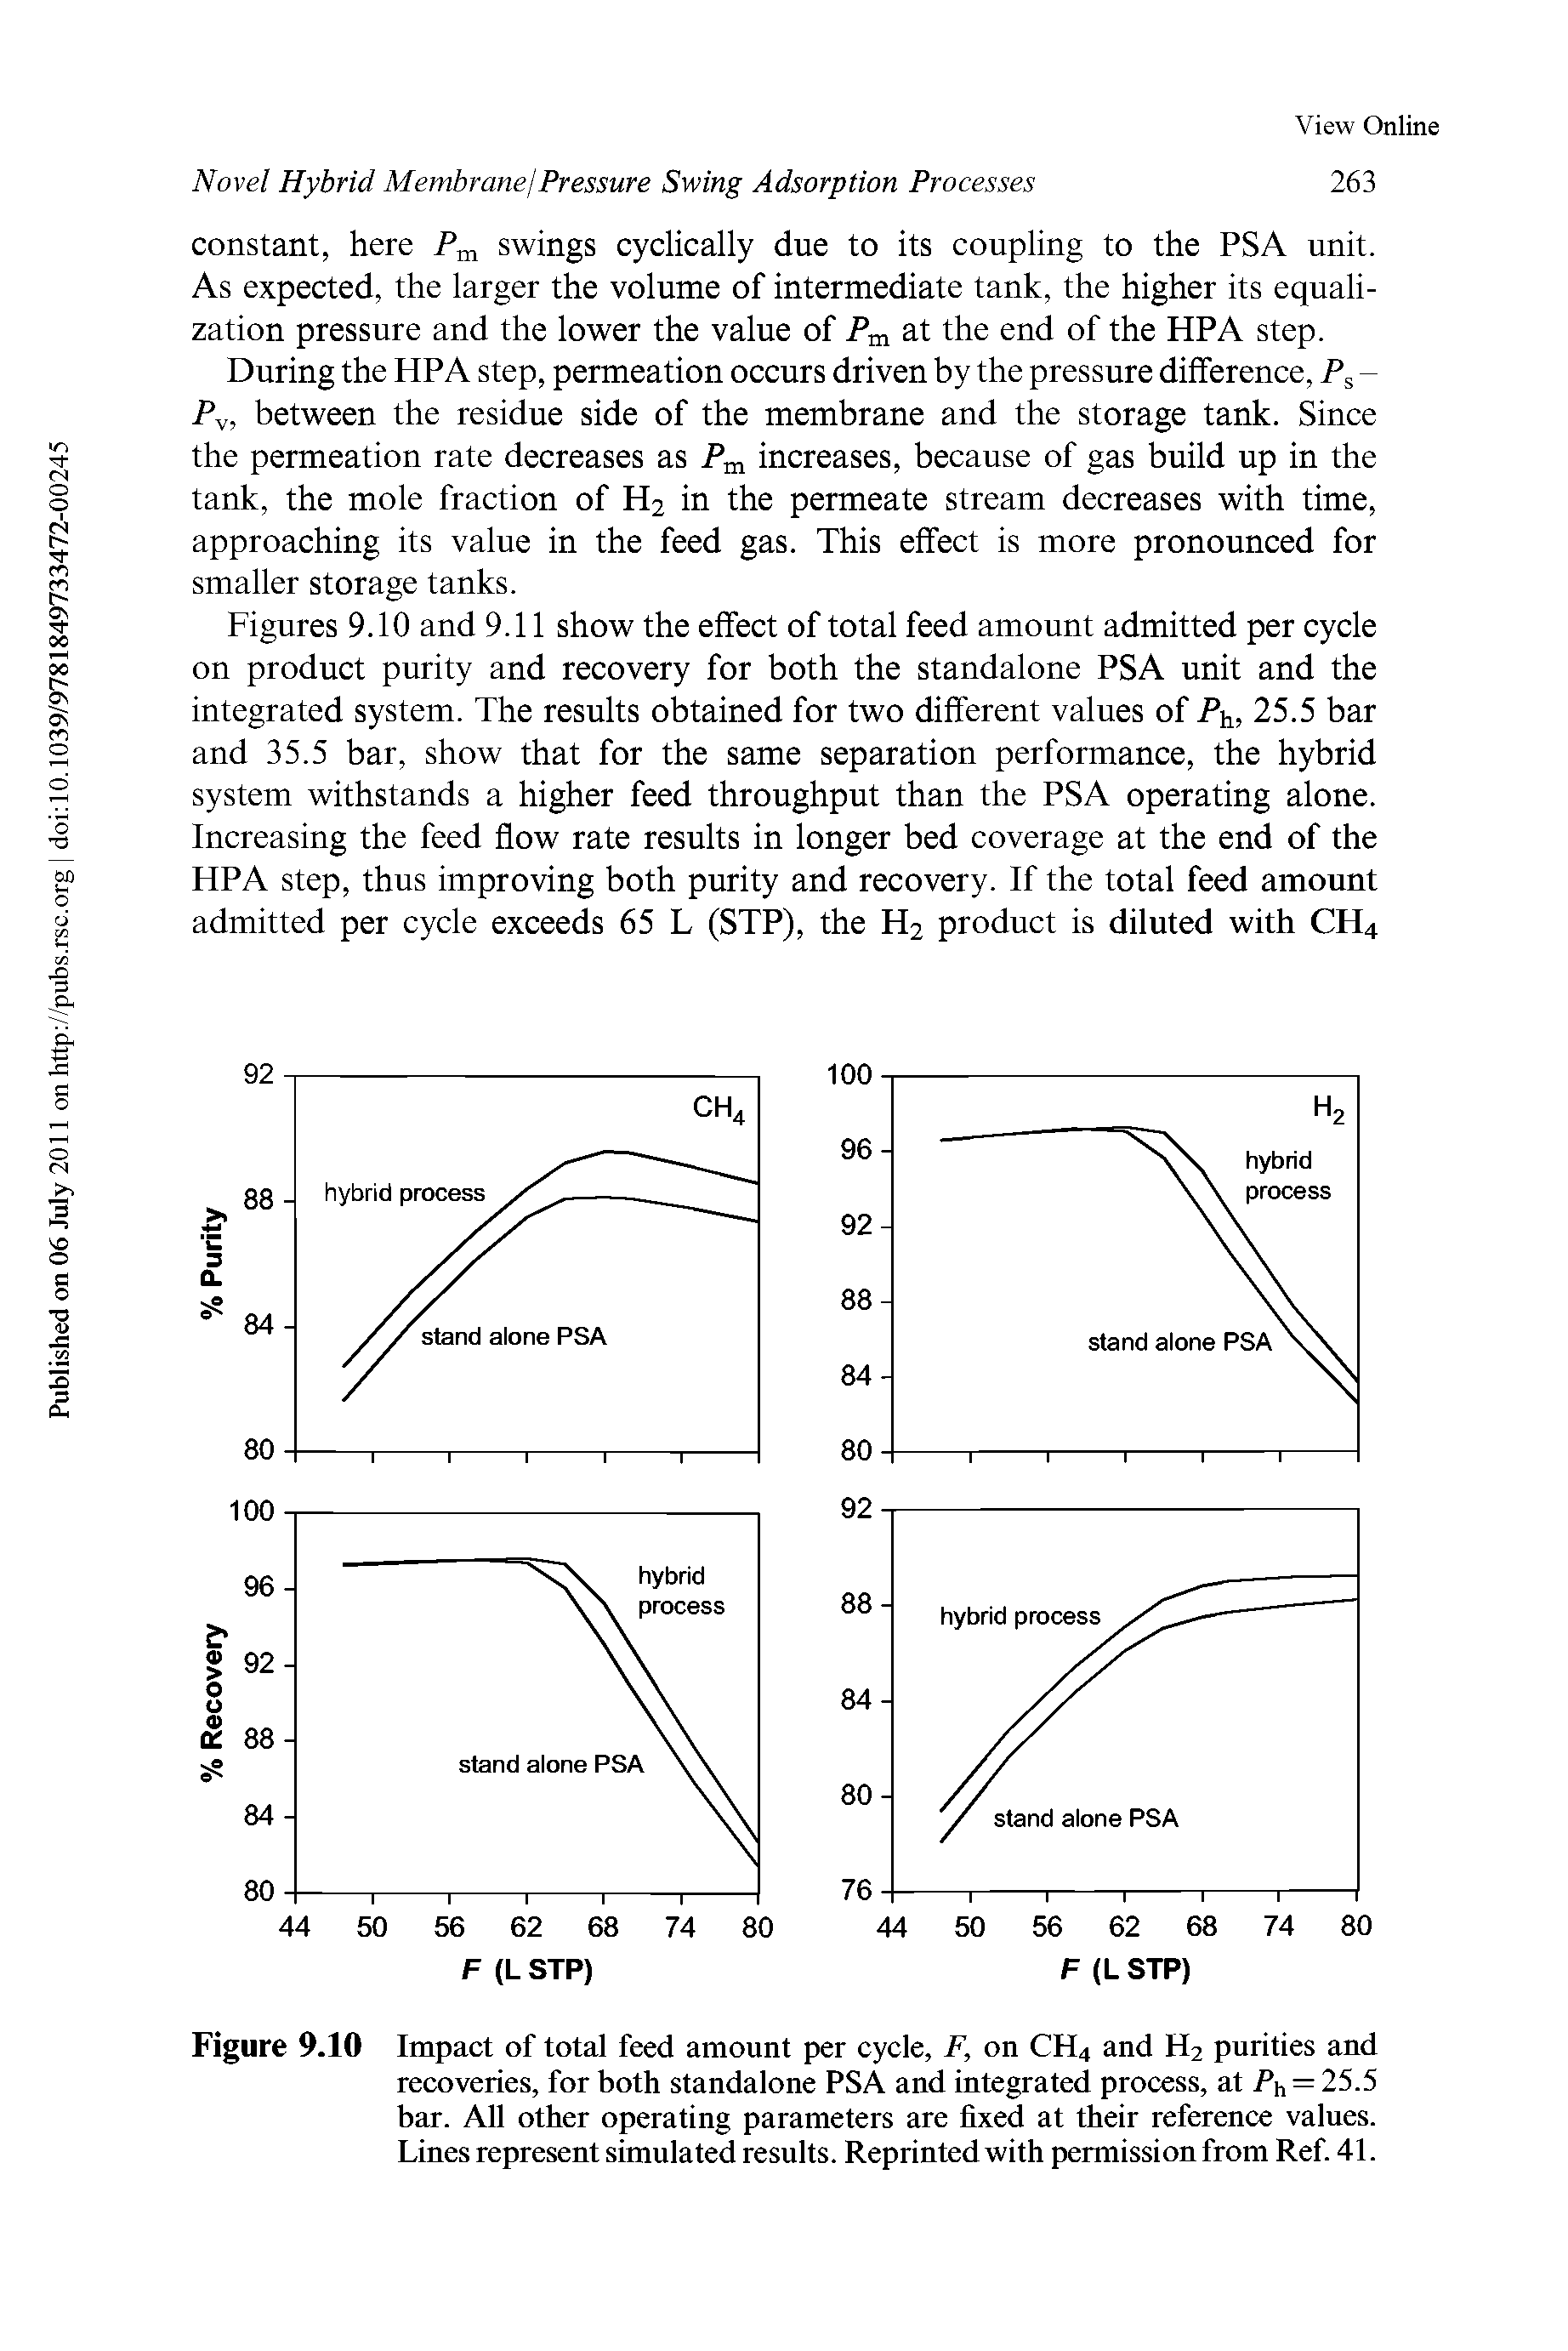 Figures 9.10 and 9.11 show the effect of total feed amount admitted per cycle on product purity and recovery for both the standalone PSA unit and the integrated system. The results obtained for two different values of A, 25.5 bar and 35.5 bar, show that for the same separation performance, the hybrid system withstands a higher feed throughput than the PSA operating alone. Increasing the feed flow rate results in longer bed coverage at the end of the HPA step, thus improving both purity and recovery. If the total feed amount admitted per cycle exceeds 65 L (STP), the H2 product is diluted with CH4...